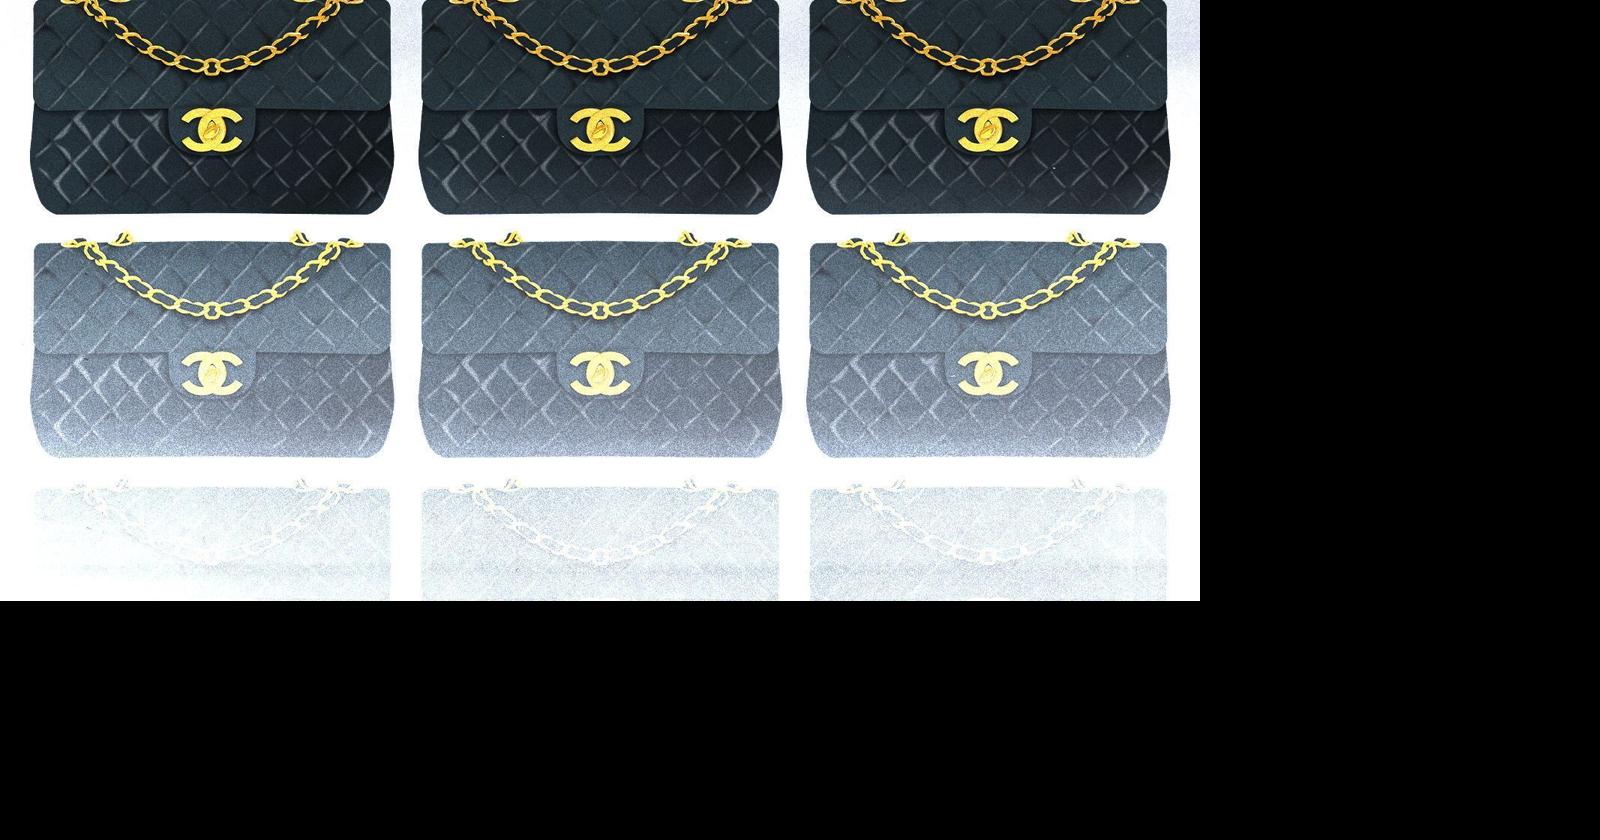 Chanel Resale Value & How to Maximize Profits - Academy by FASHIONPHILE